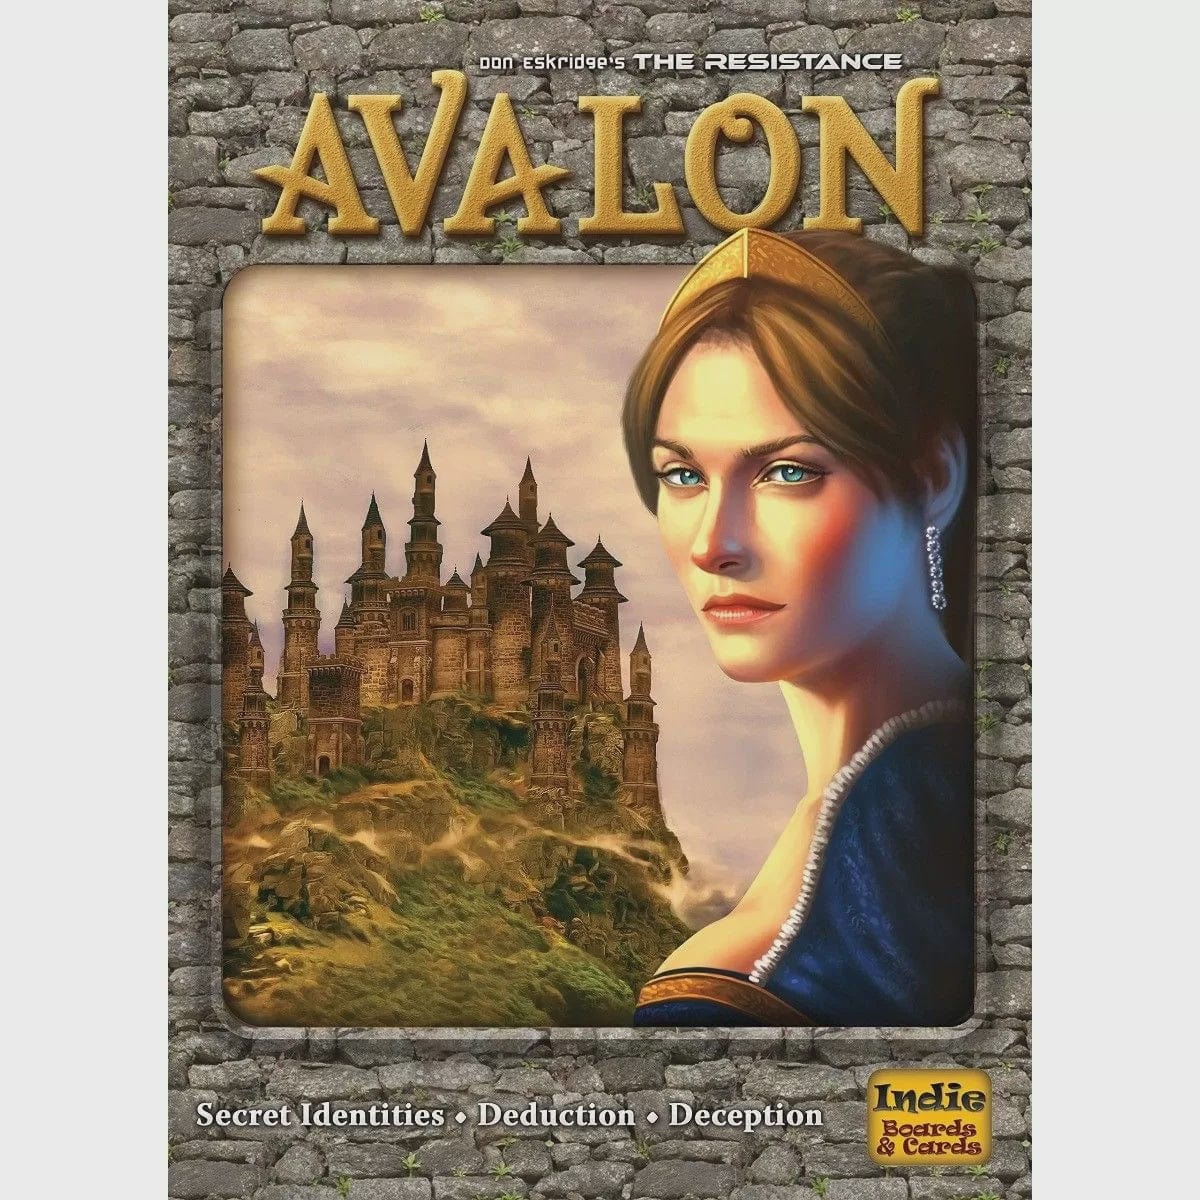 lets play games Board game The Resistance Avalon